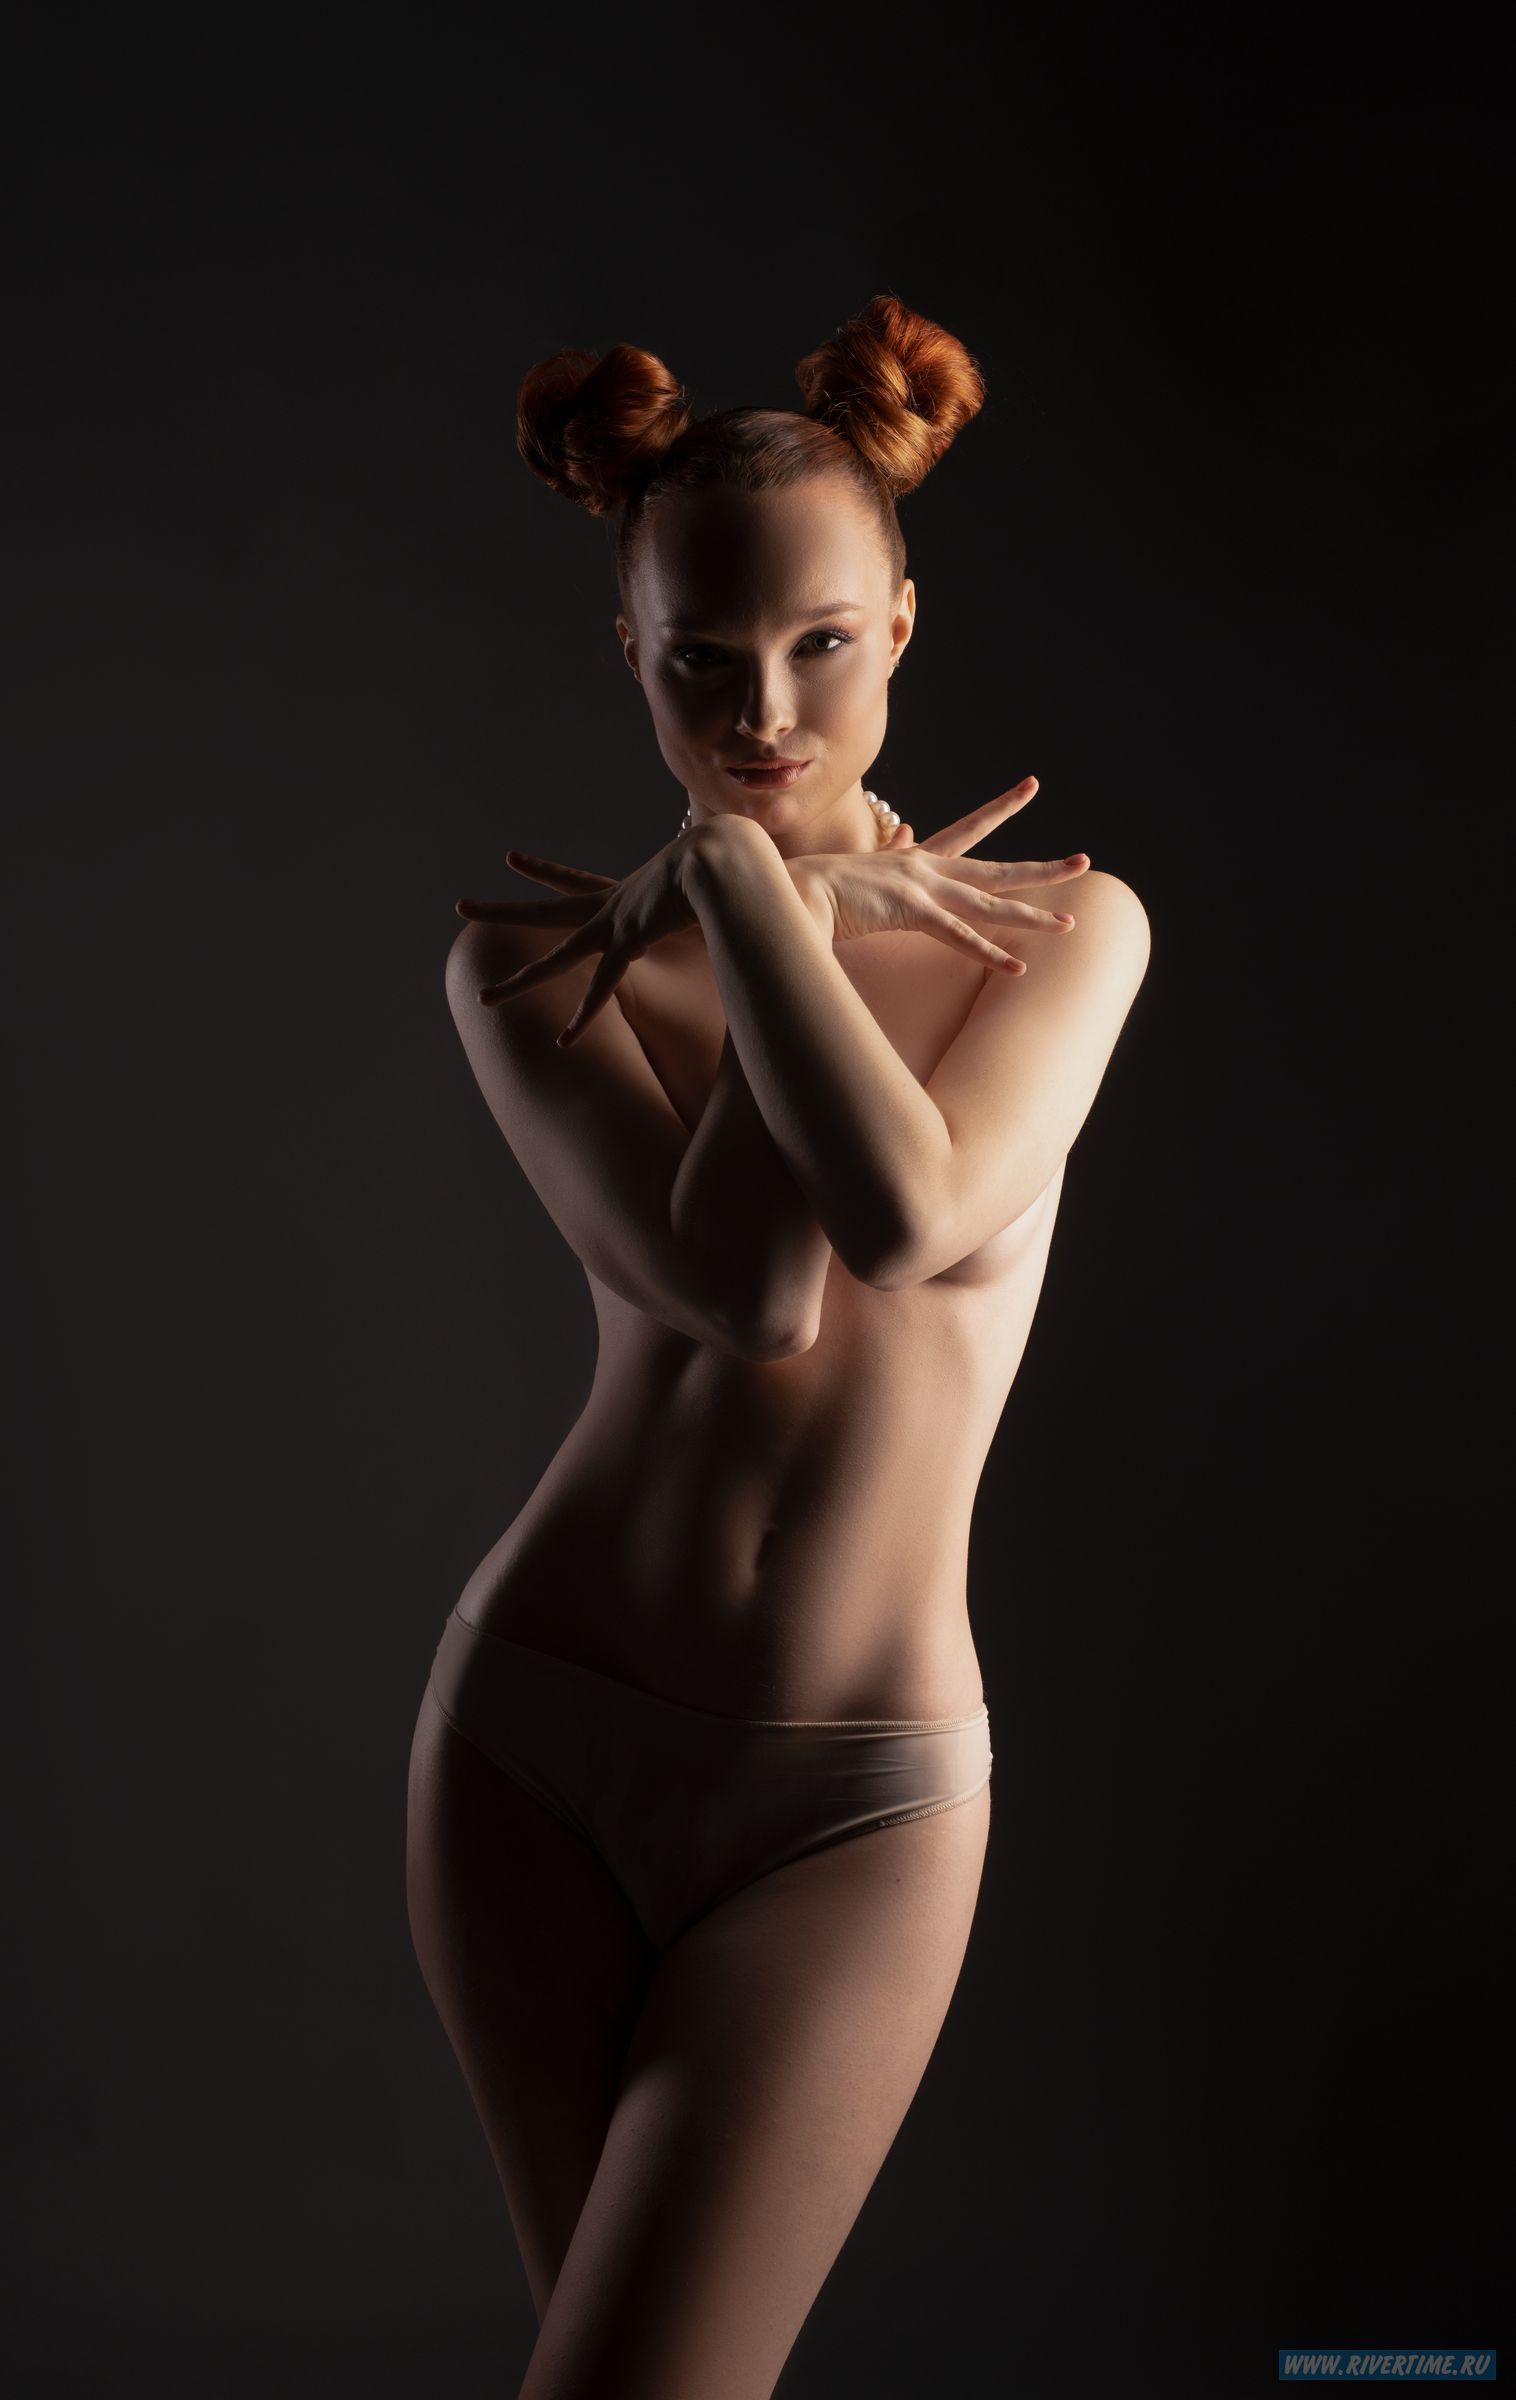 woman; topless; cover breast; allure; confident; sensual; feminine; grace; sexy; portrait; model; temptation; female; young; redhead; naked torso; panties; perfect; self assured; body; gorgeous; ginger hair; fit; self esteem; passion; naked; lady; individ, Andrey Guryanov